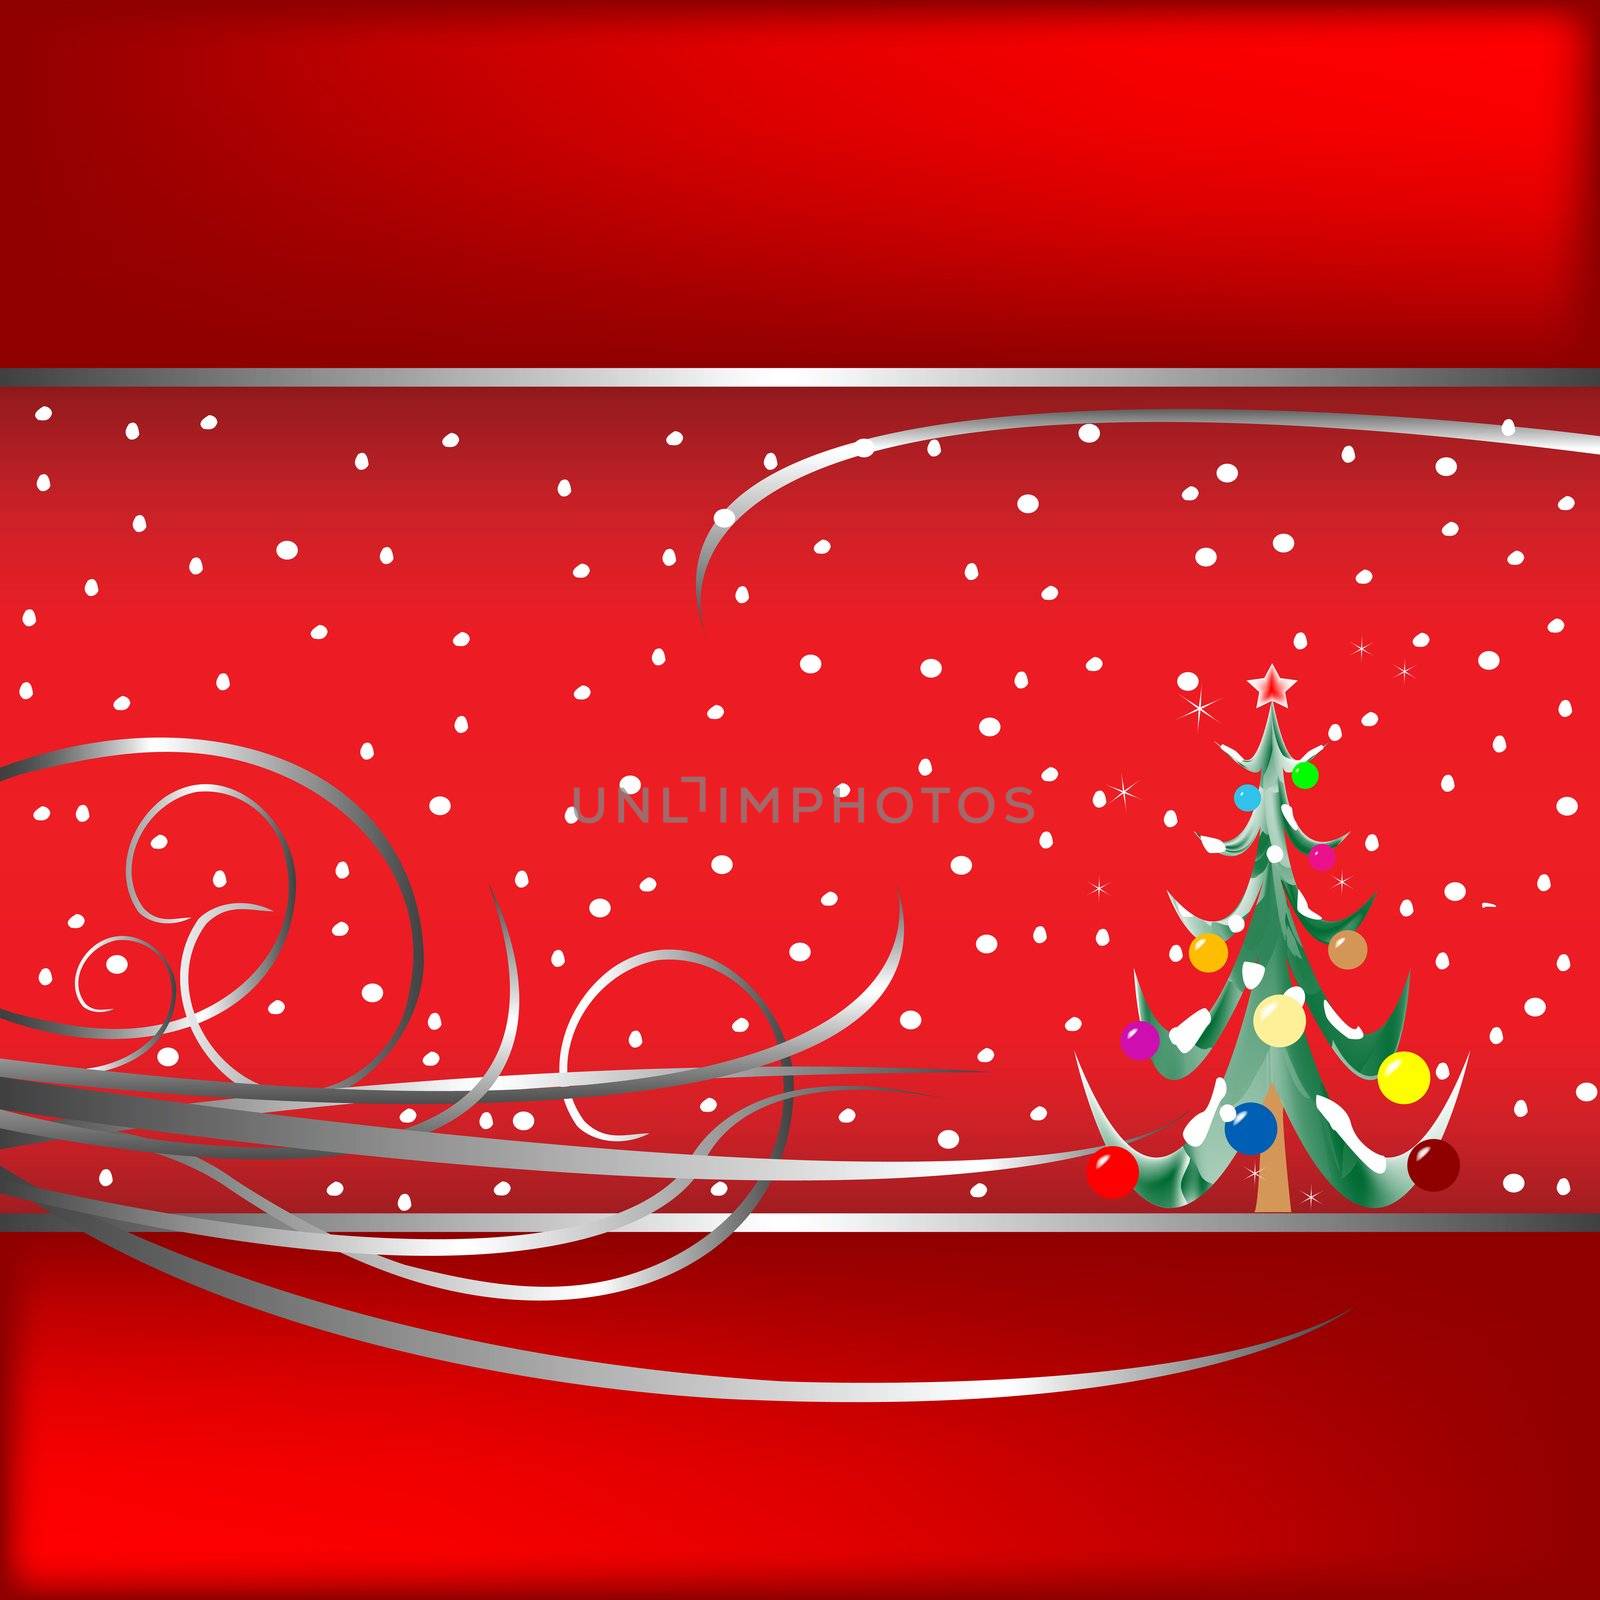 christmas tree card, vector art illustration; more drawings in my gallery